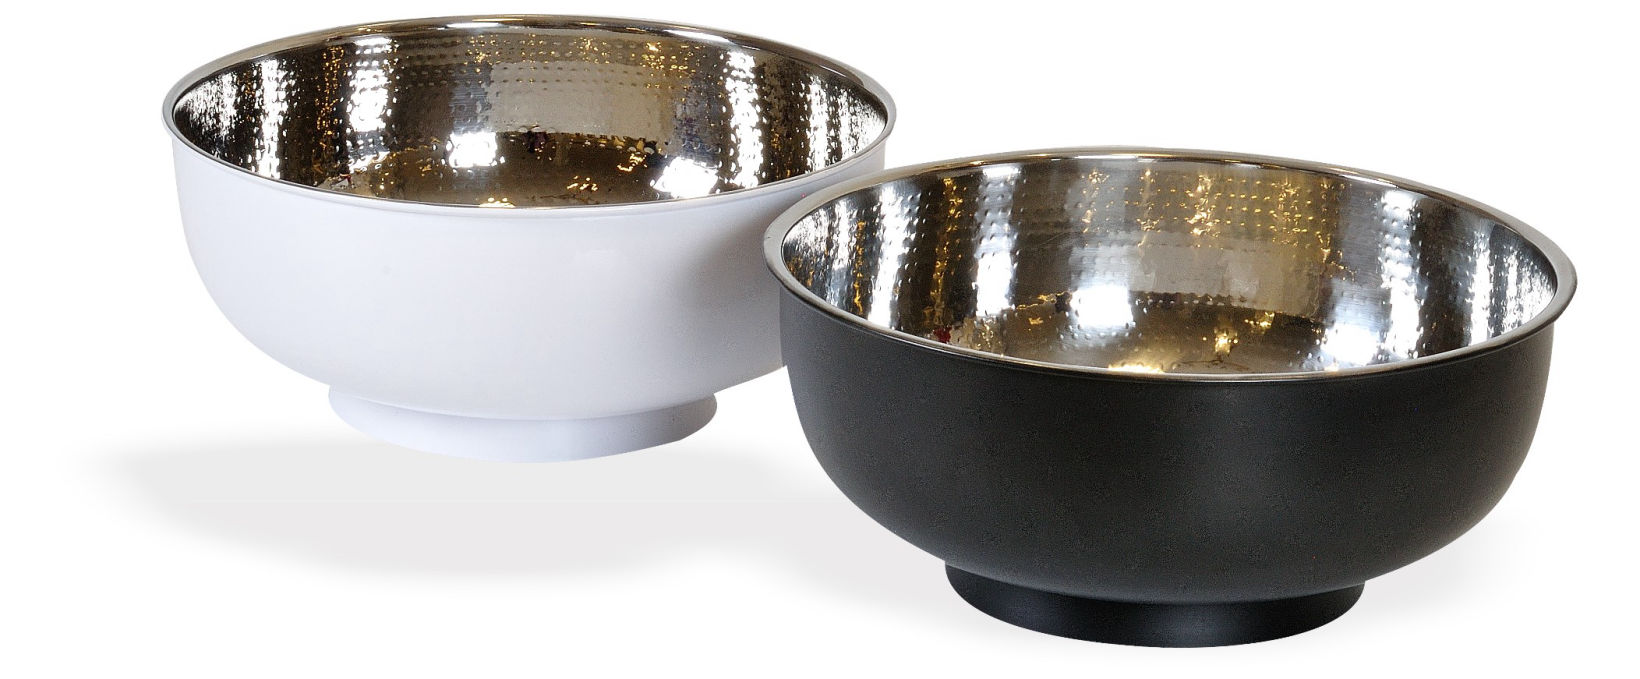 Powder Coated Stainless Steel Foot Wash Bowls